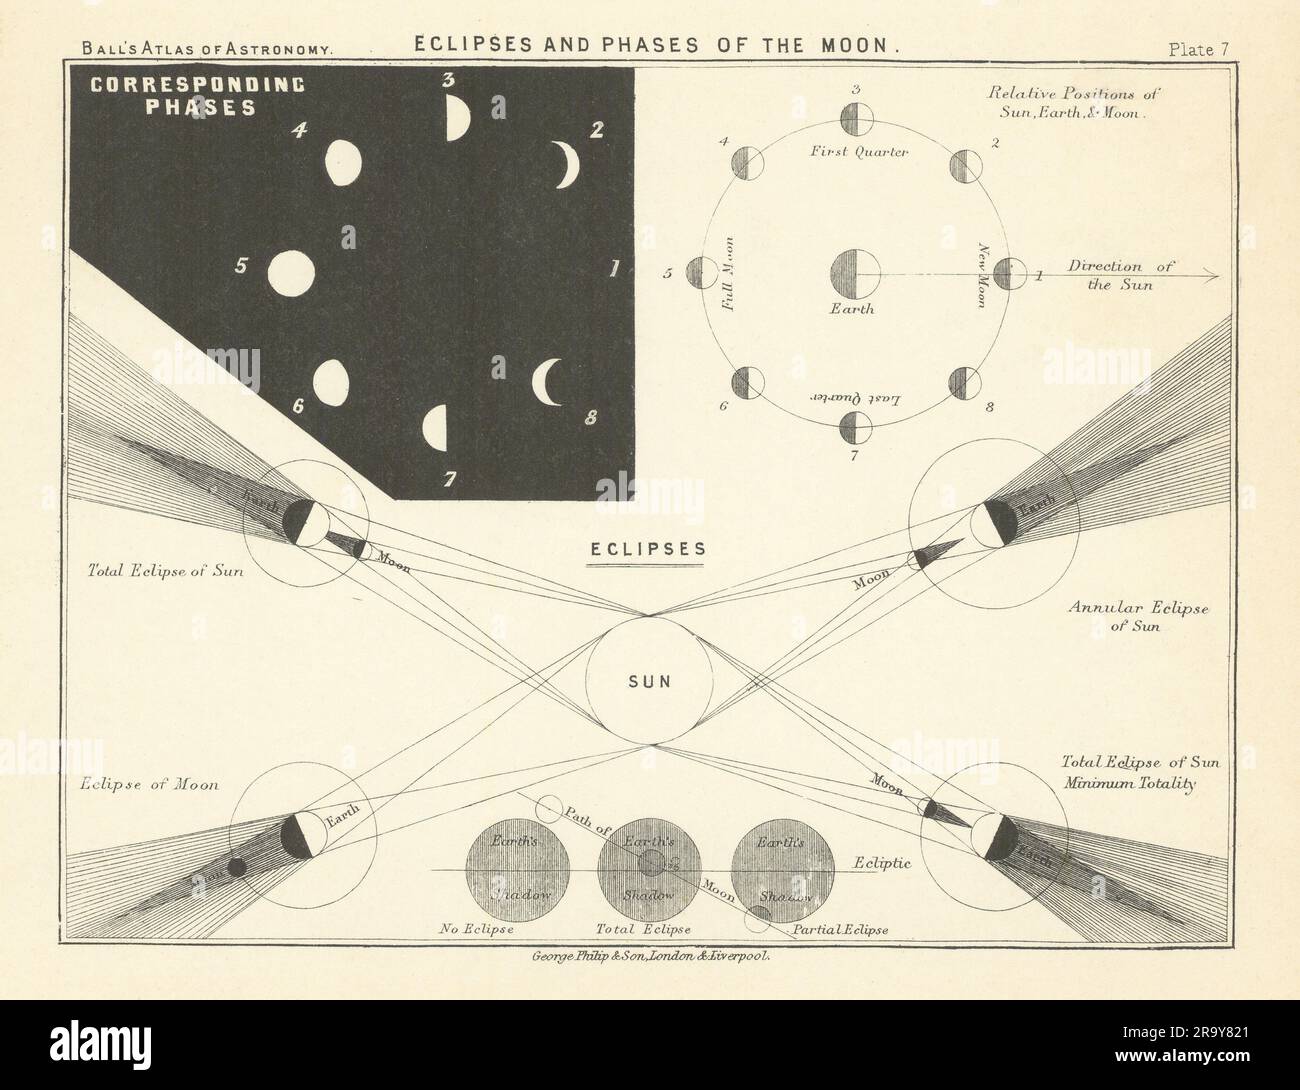 Eclipses and Phases of the Moon by Robert Ball. Astronomy 1892 old print Stock Photo